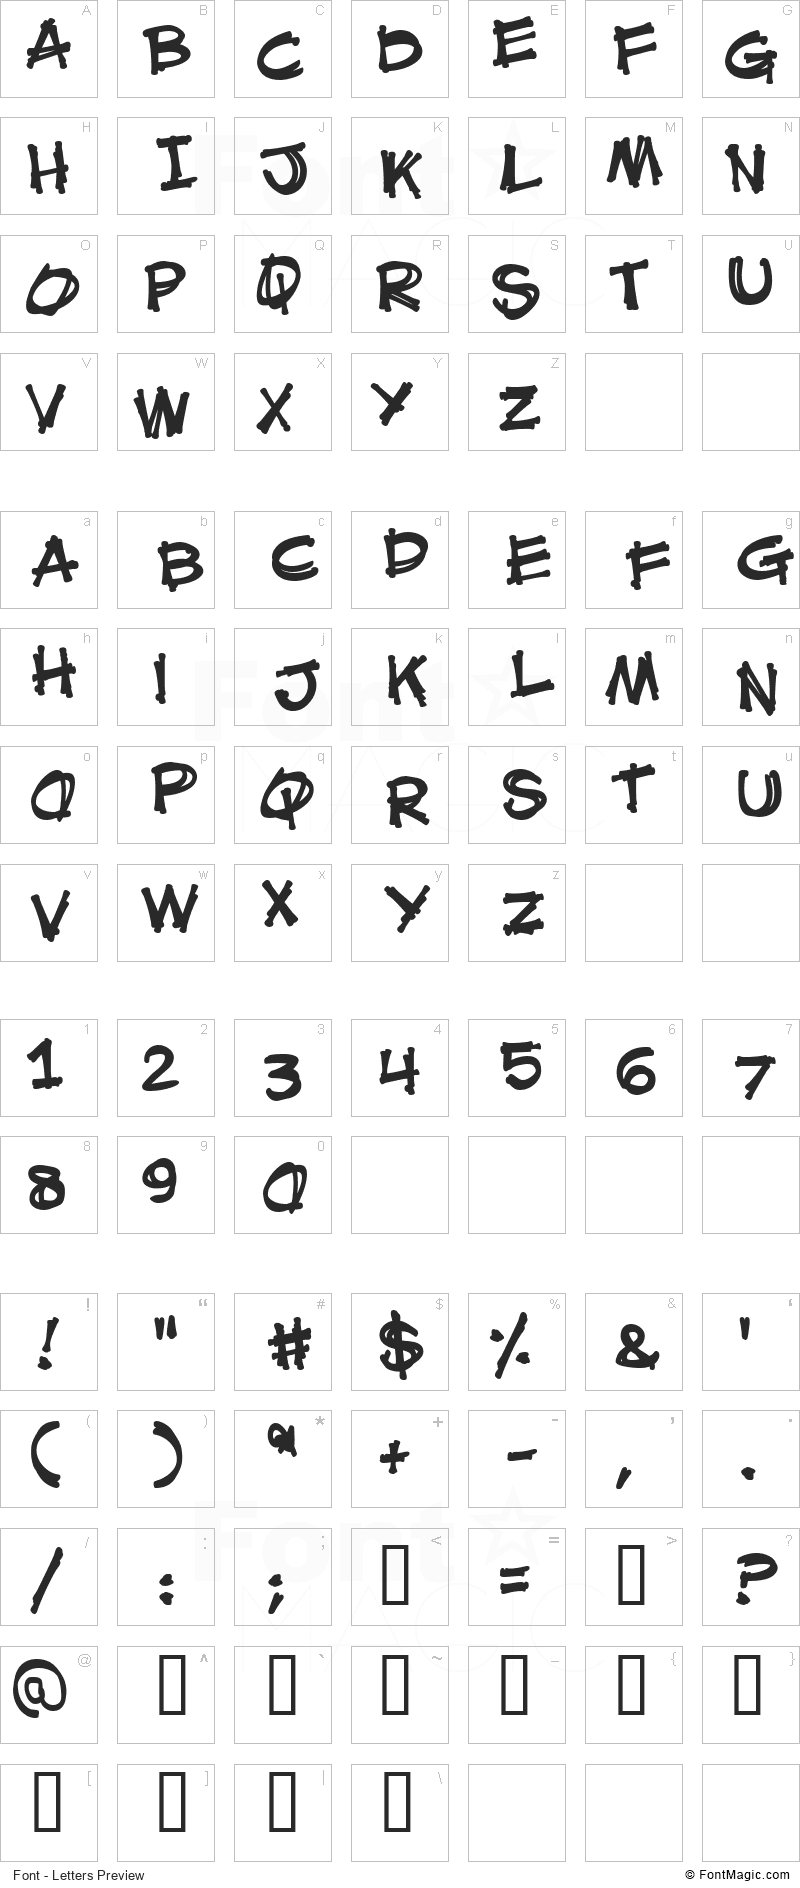 Mouth Breather Font - All Latters Preview Chart